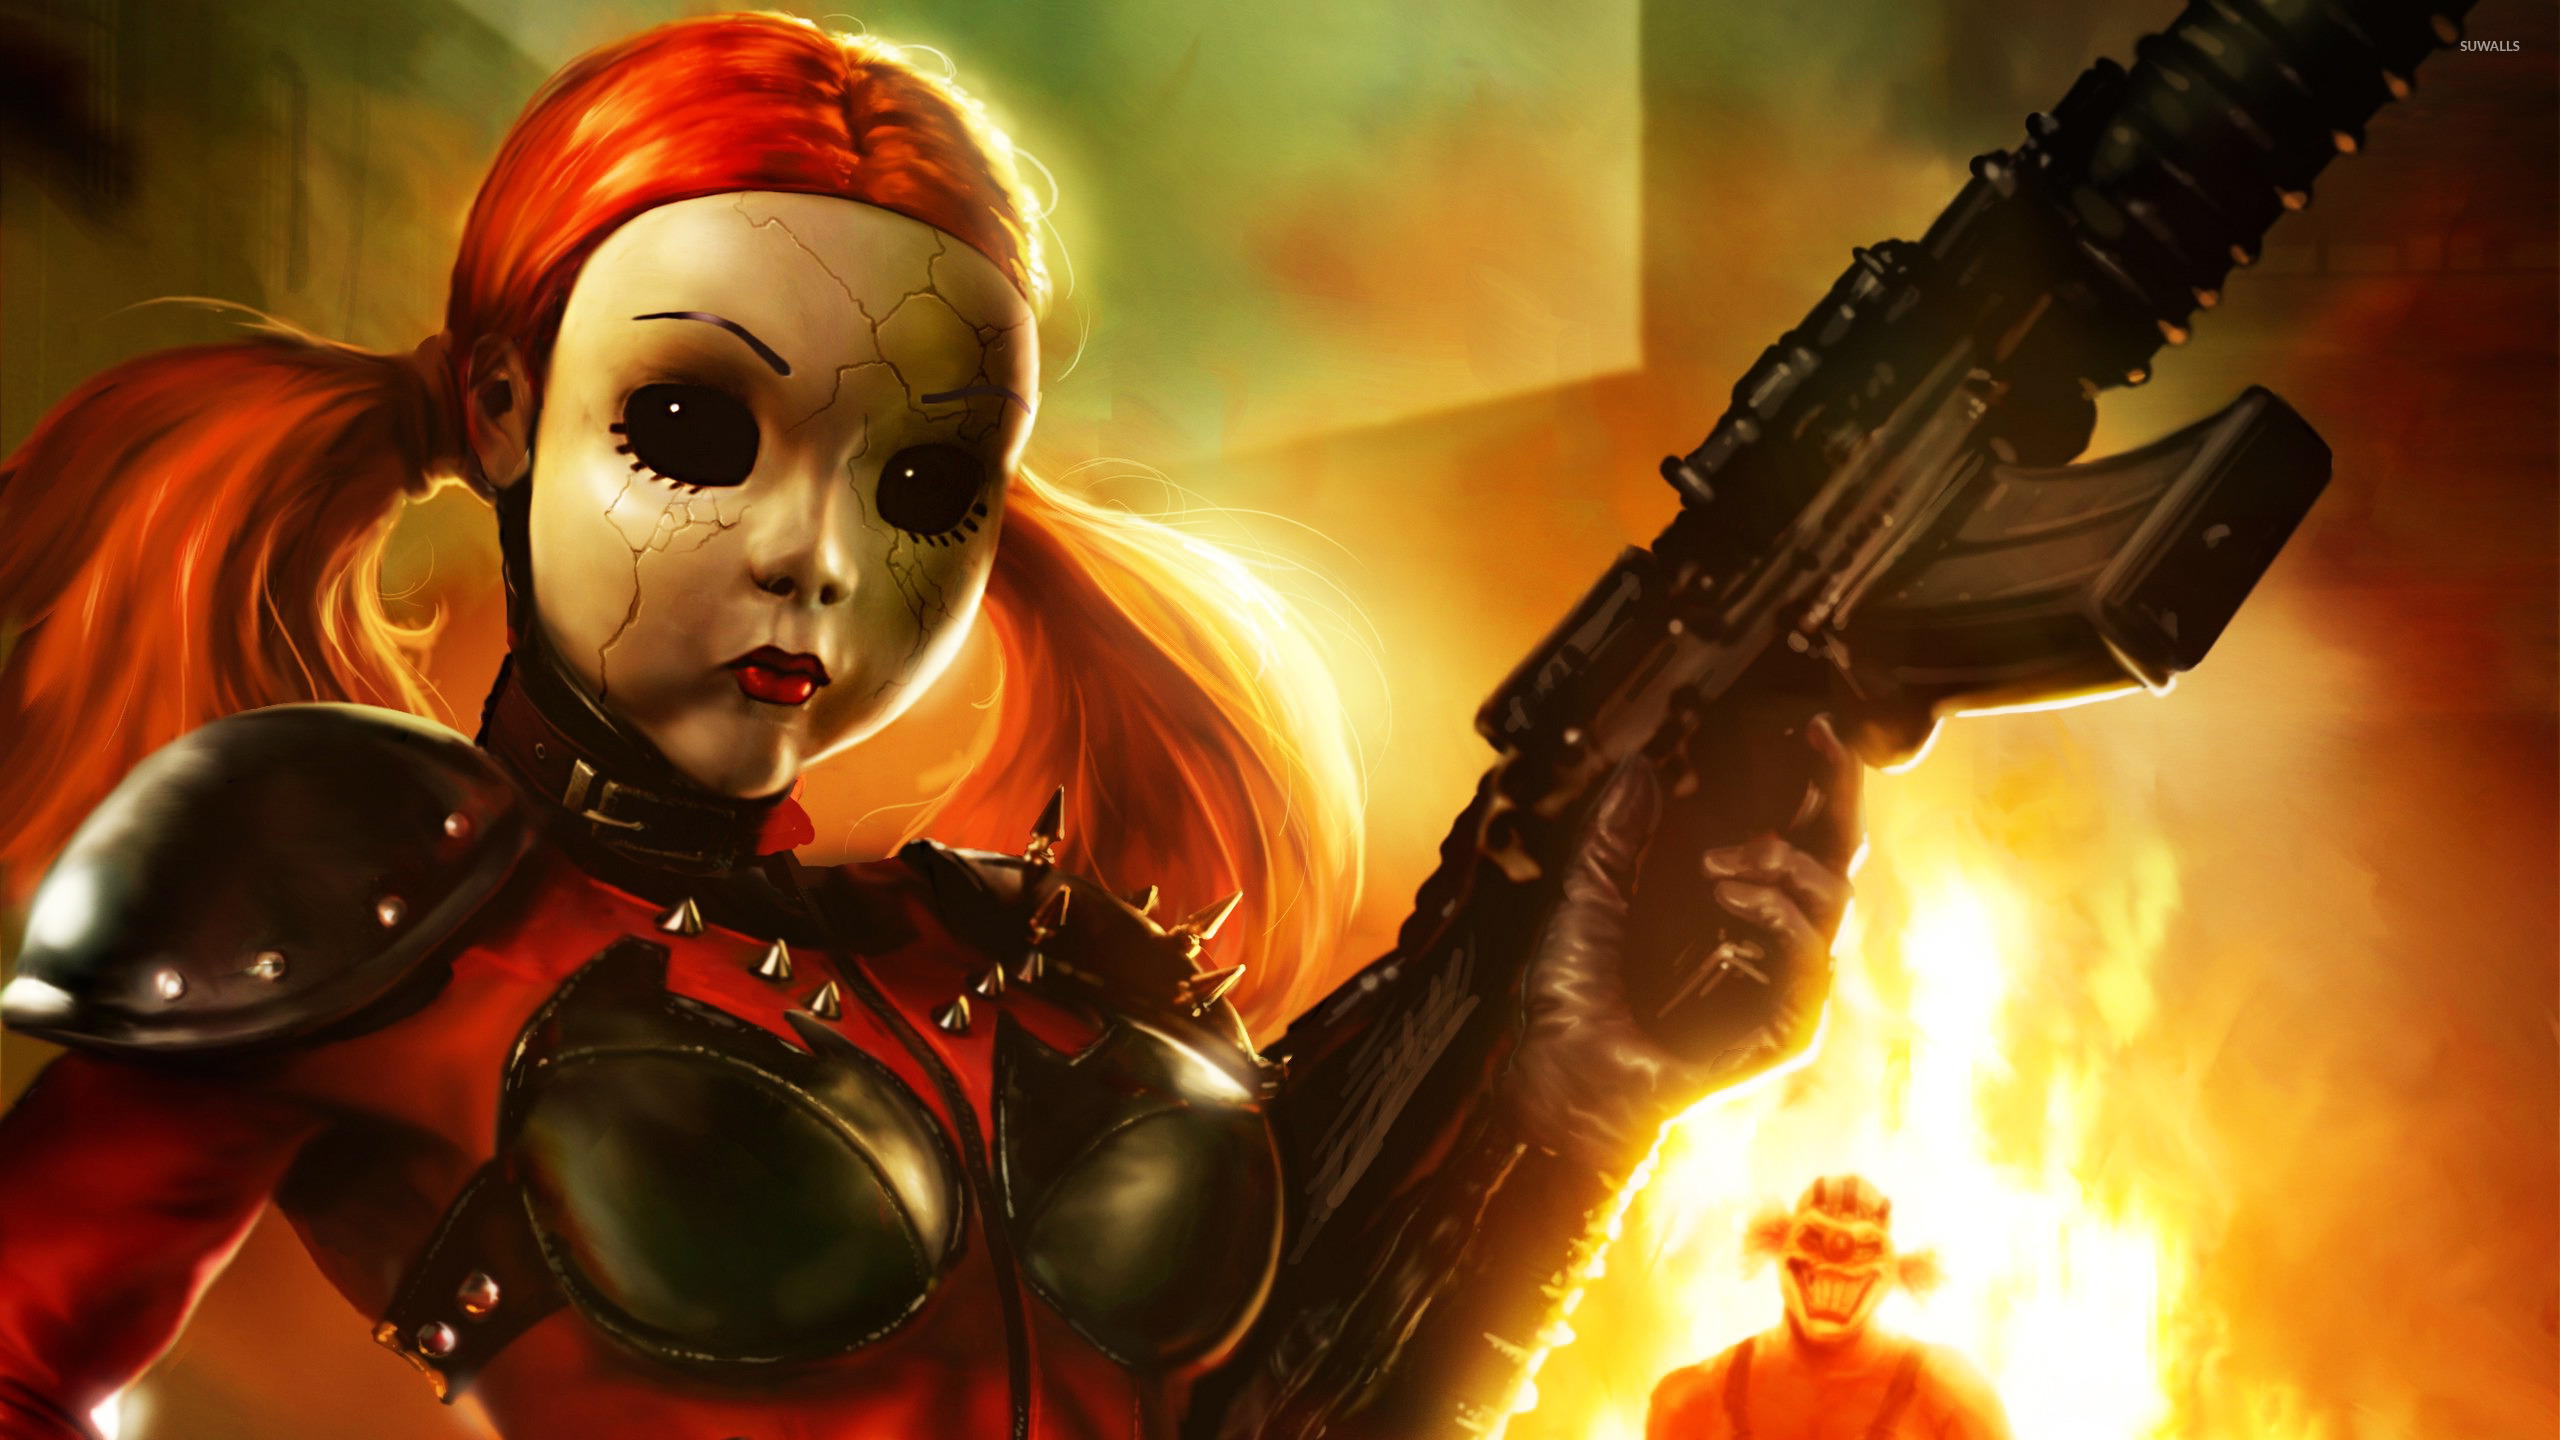 Dollface - Twisted Metal wallpaper - Game wallpapers - #17861